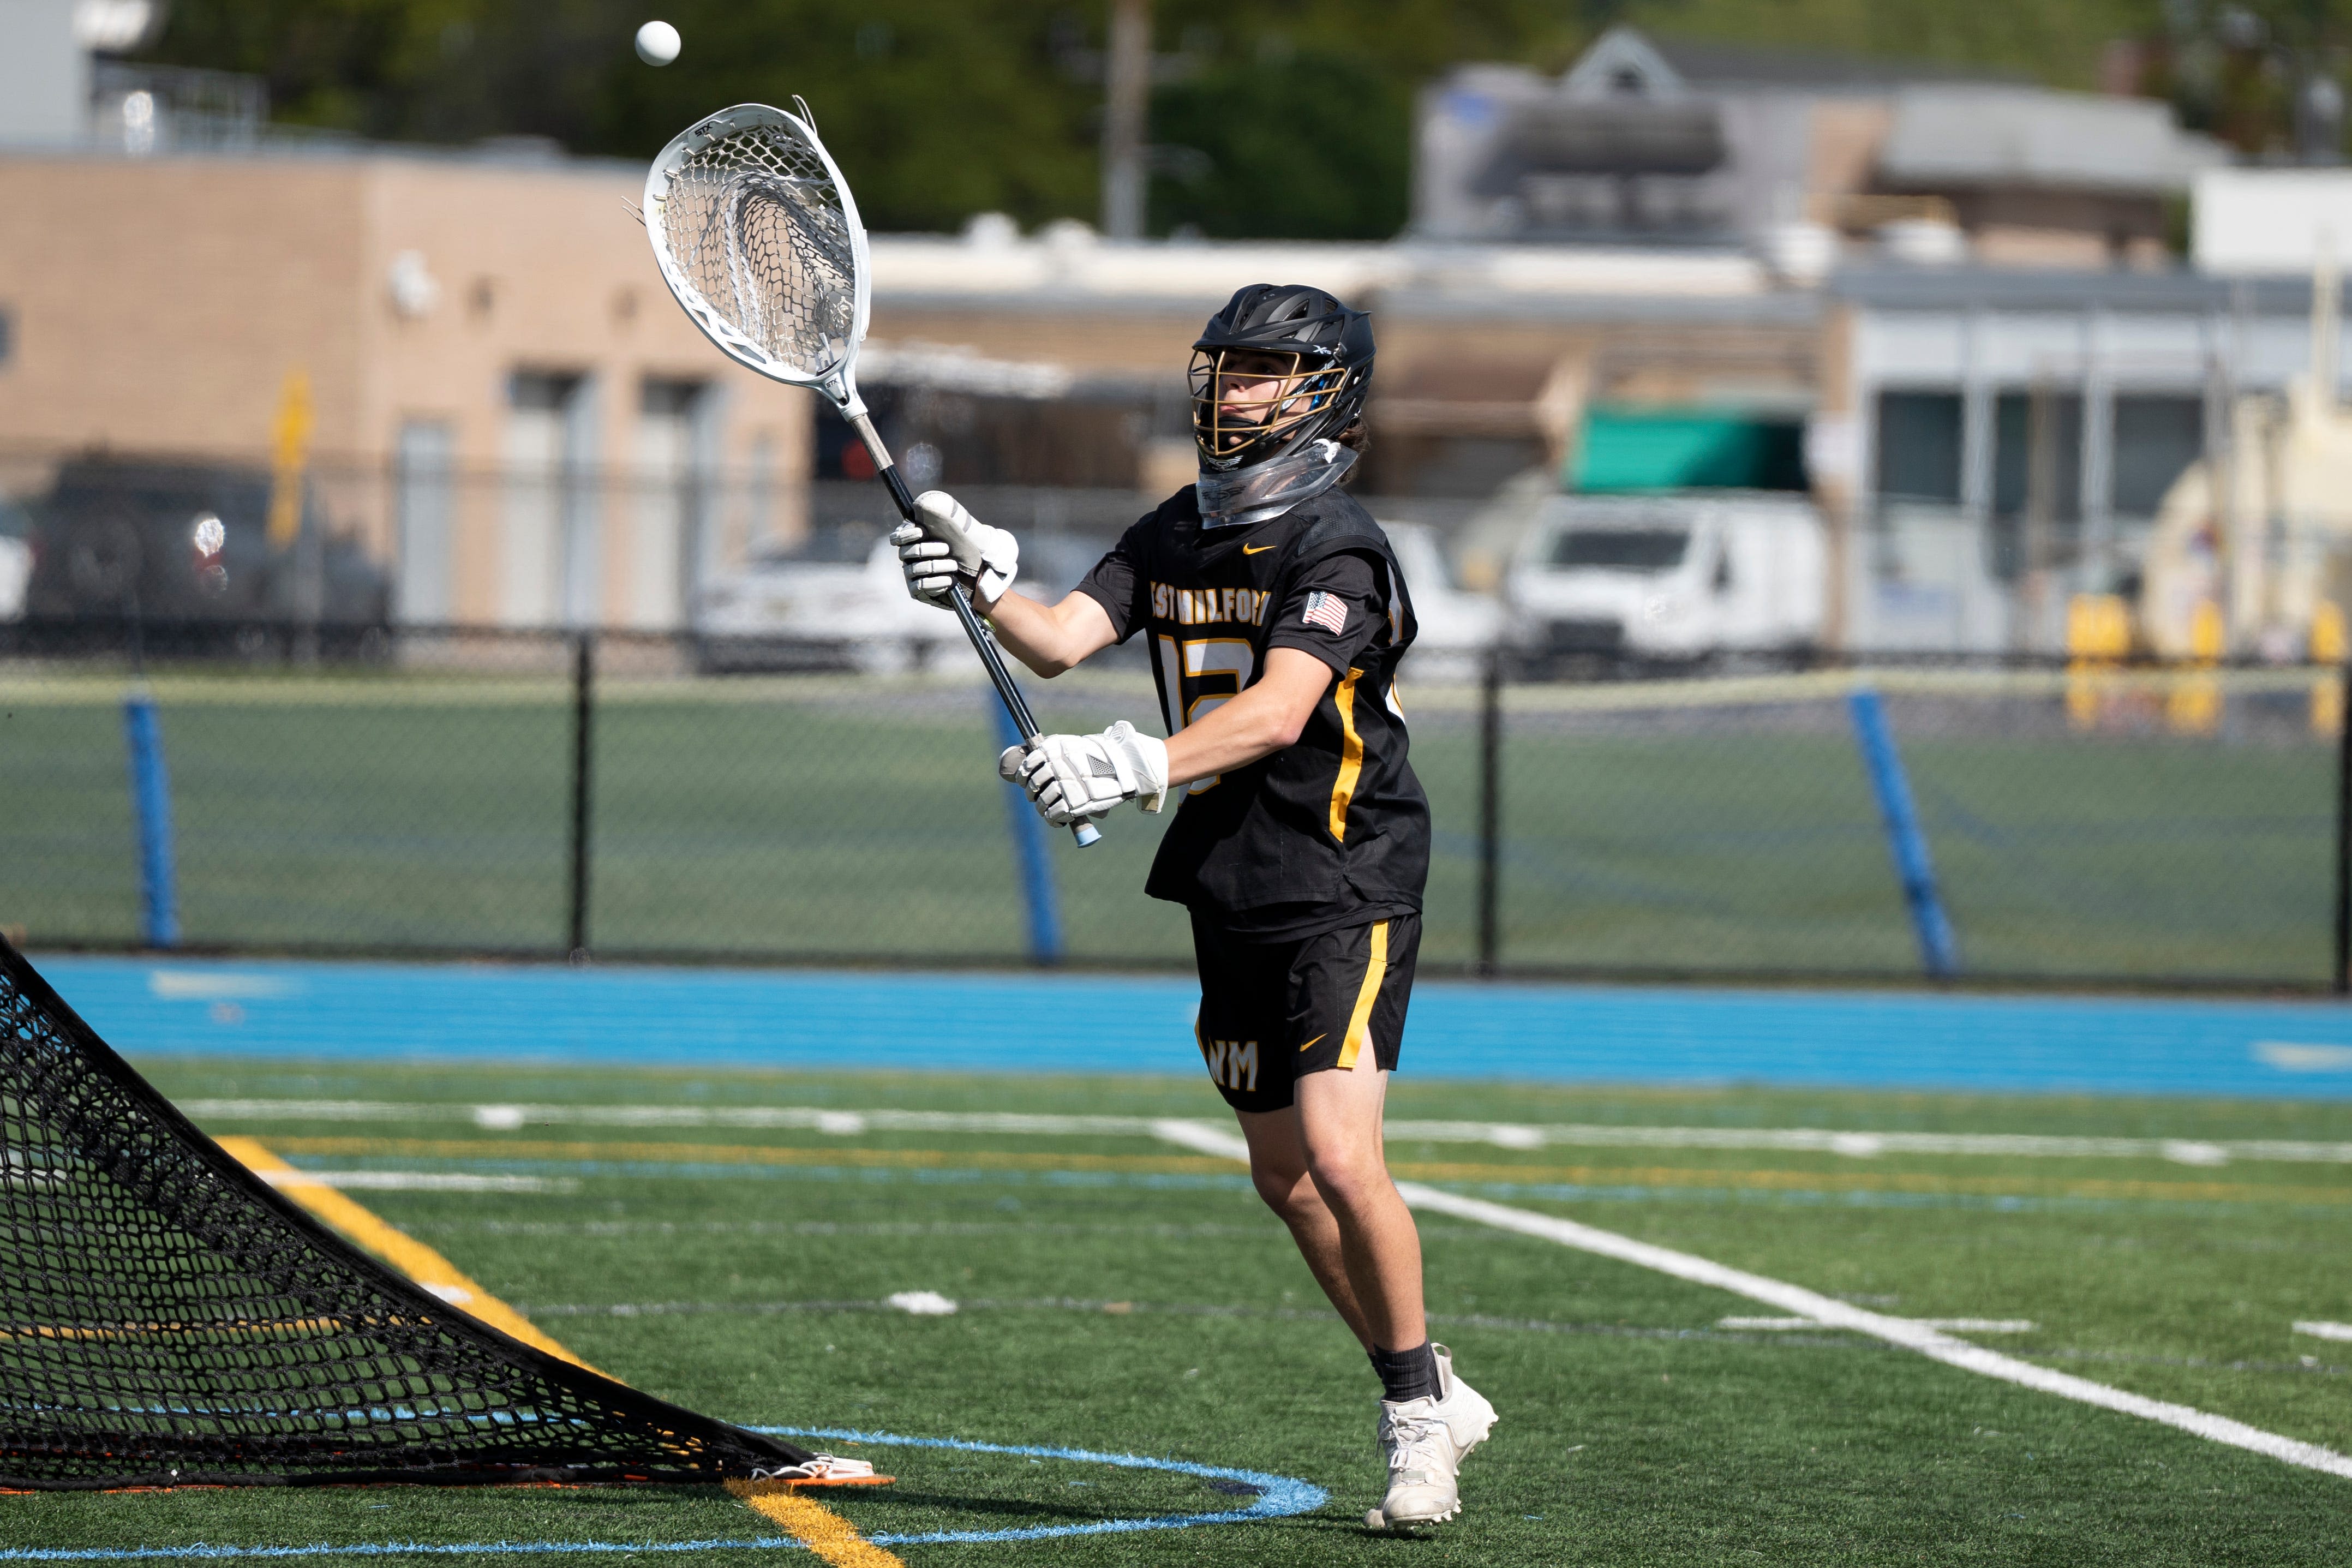 A North Jersey lacrosse goalie is poised to break county records. But does he want them?